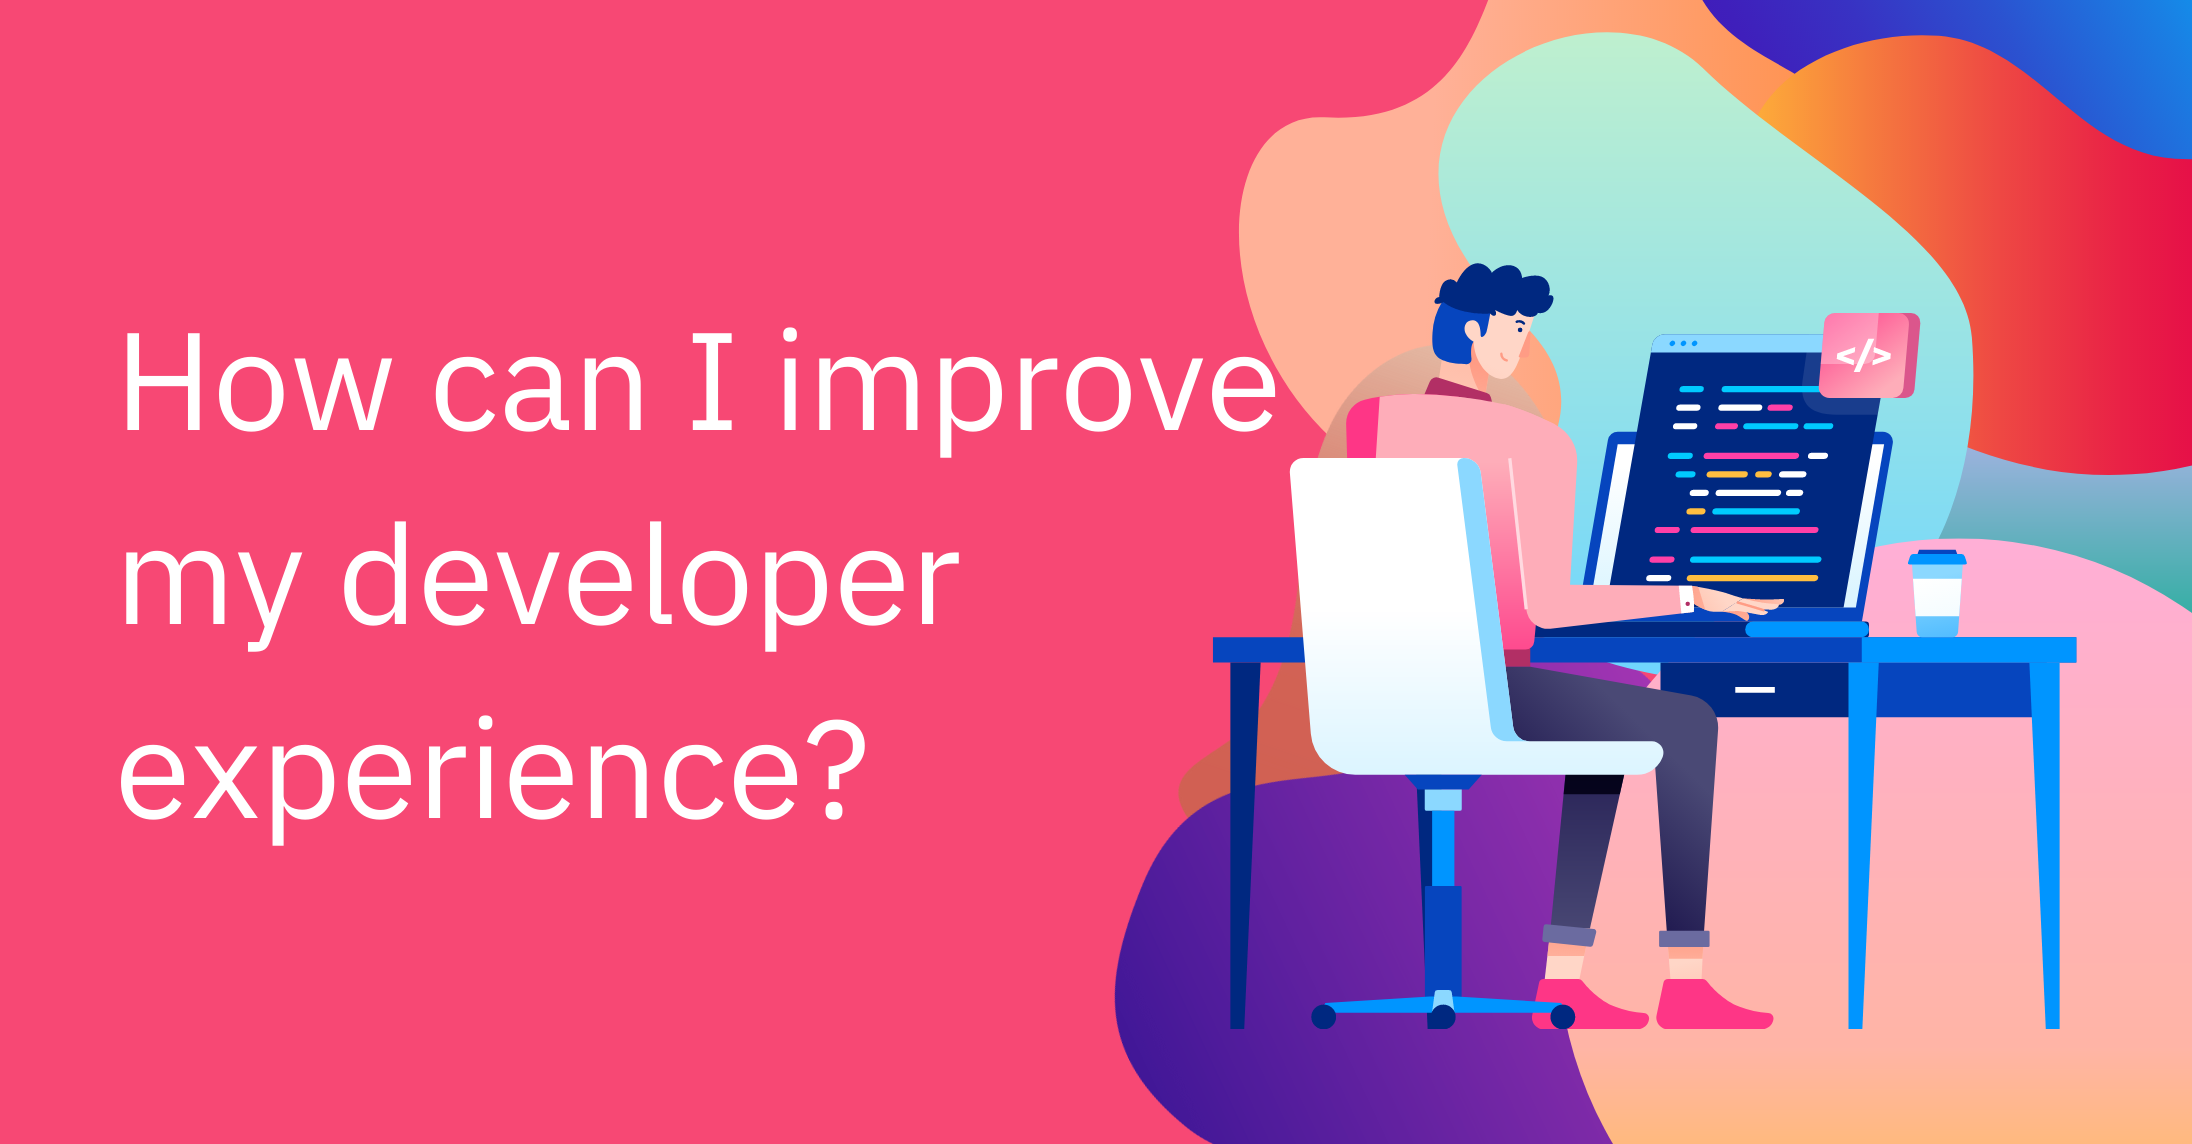 How can I improve my developer experience? 